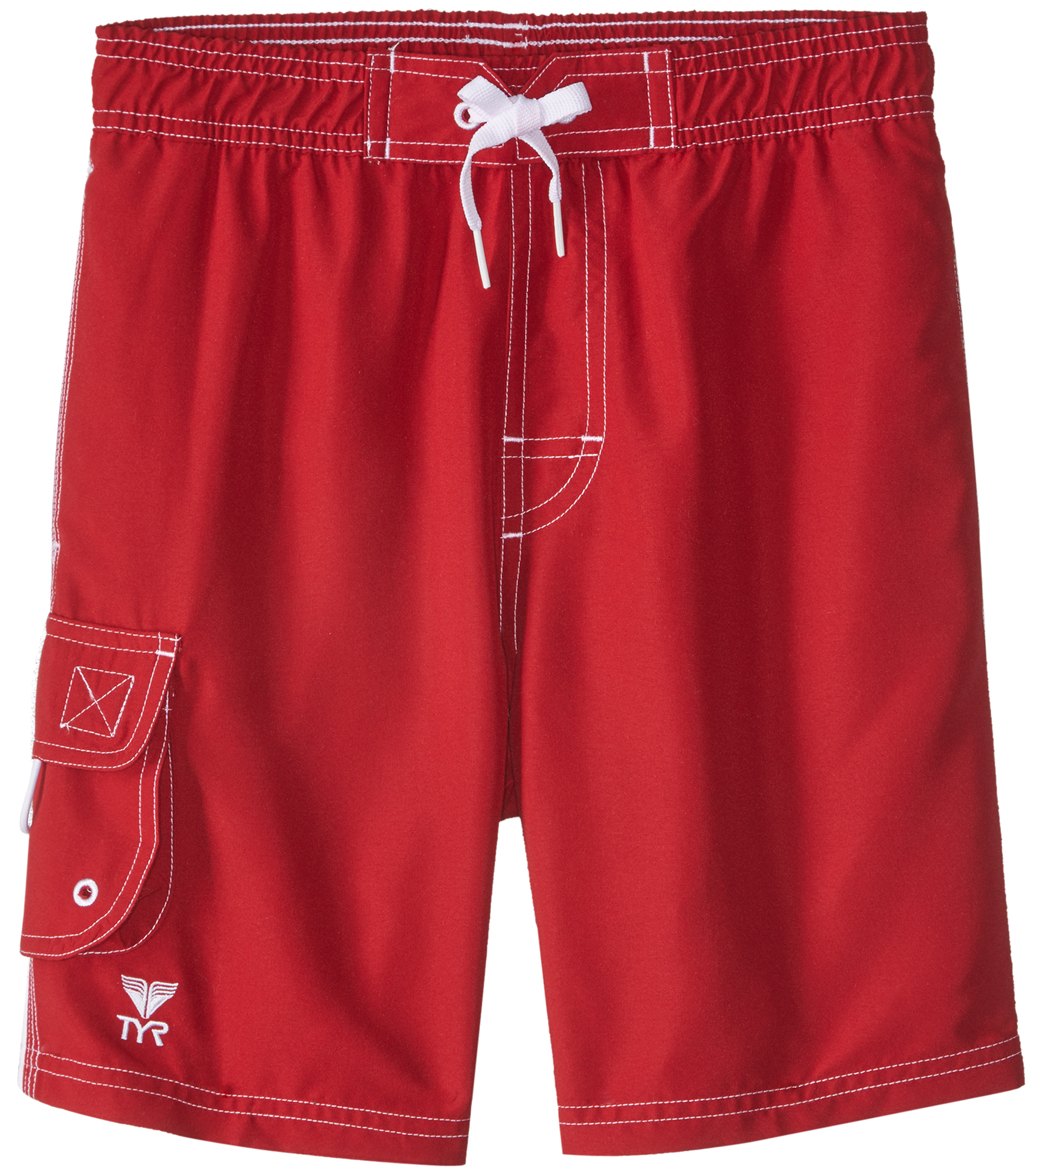 TYR Boys' Solid Challenger Swim Short Toddler/Little/Big Kid - Red Small 6/7 - Swimoutlet.com